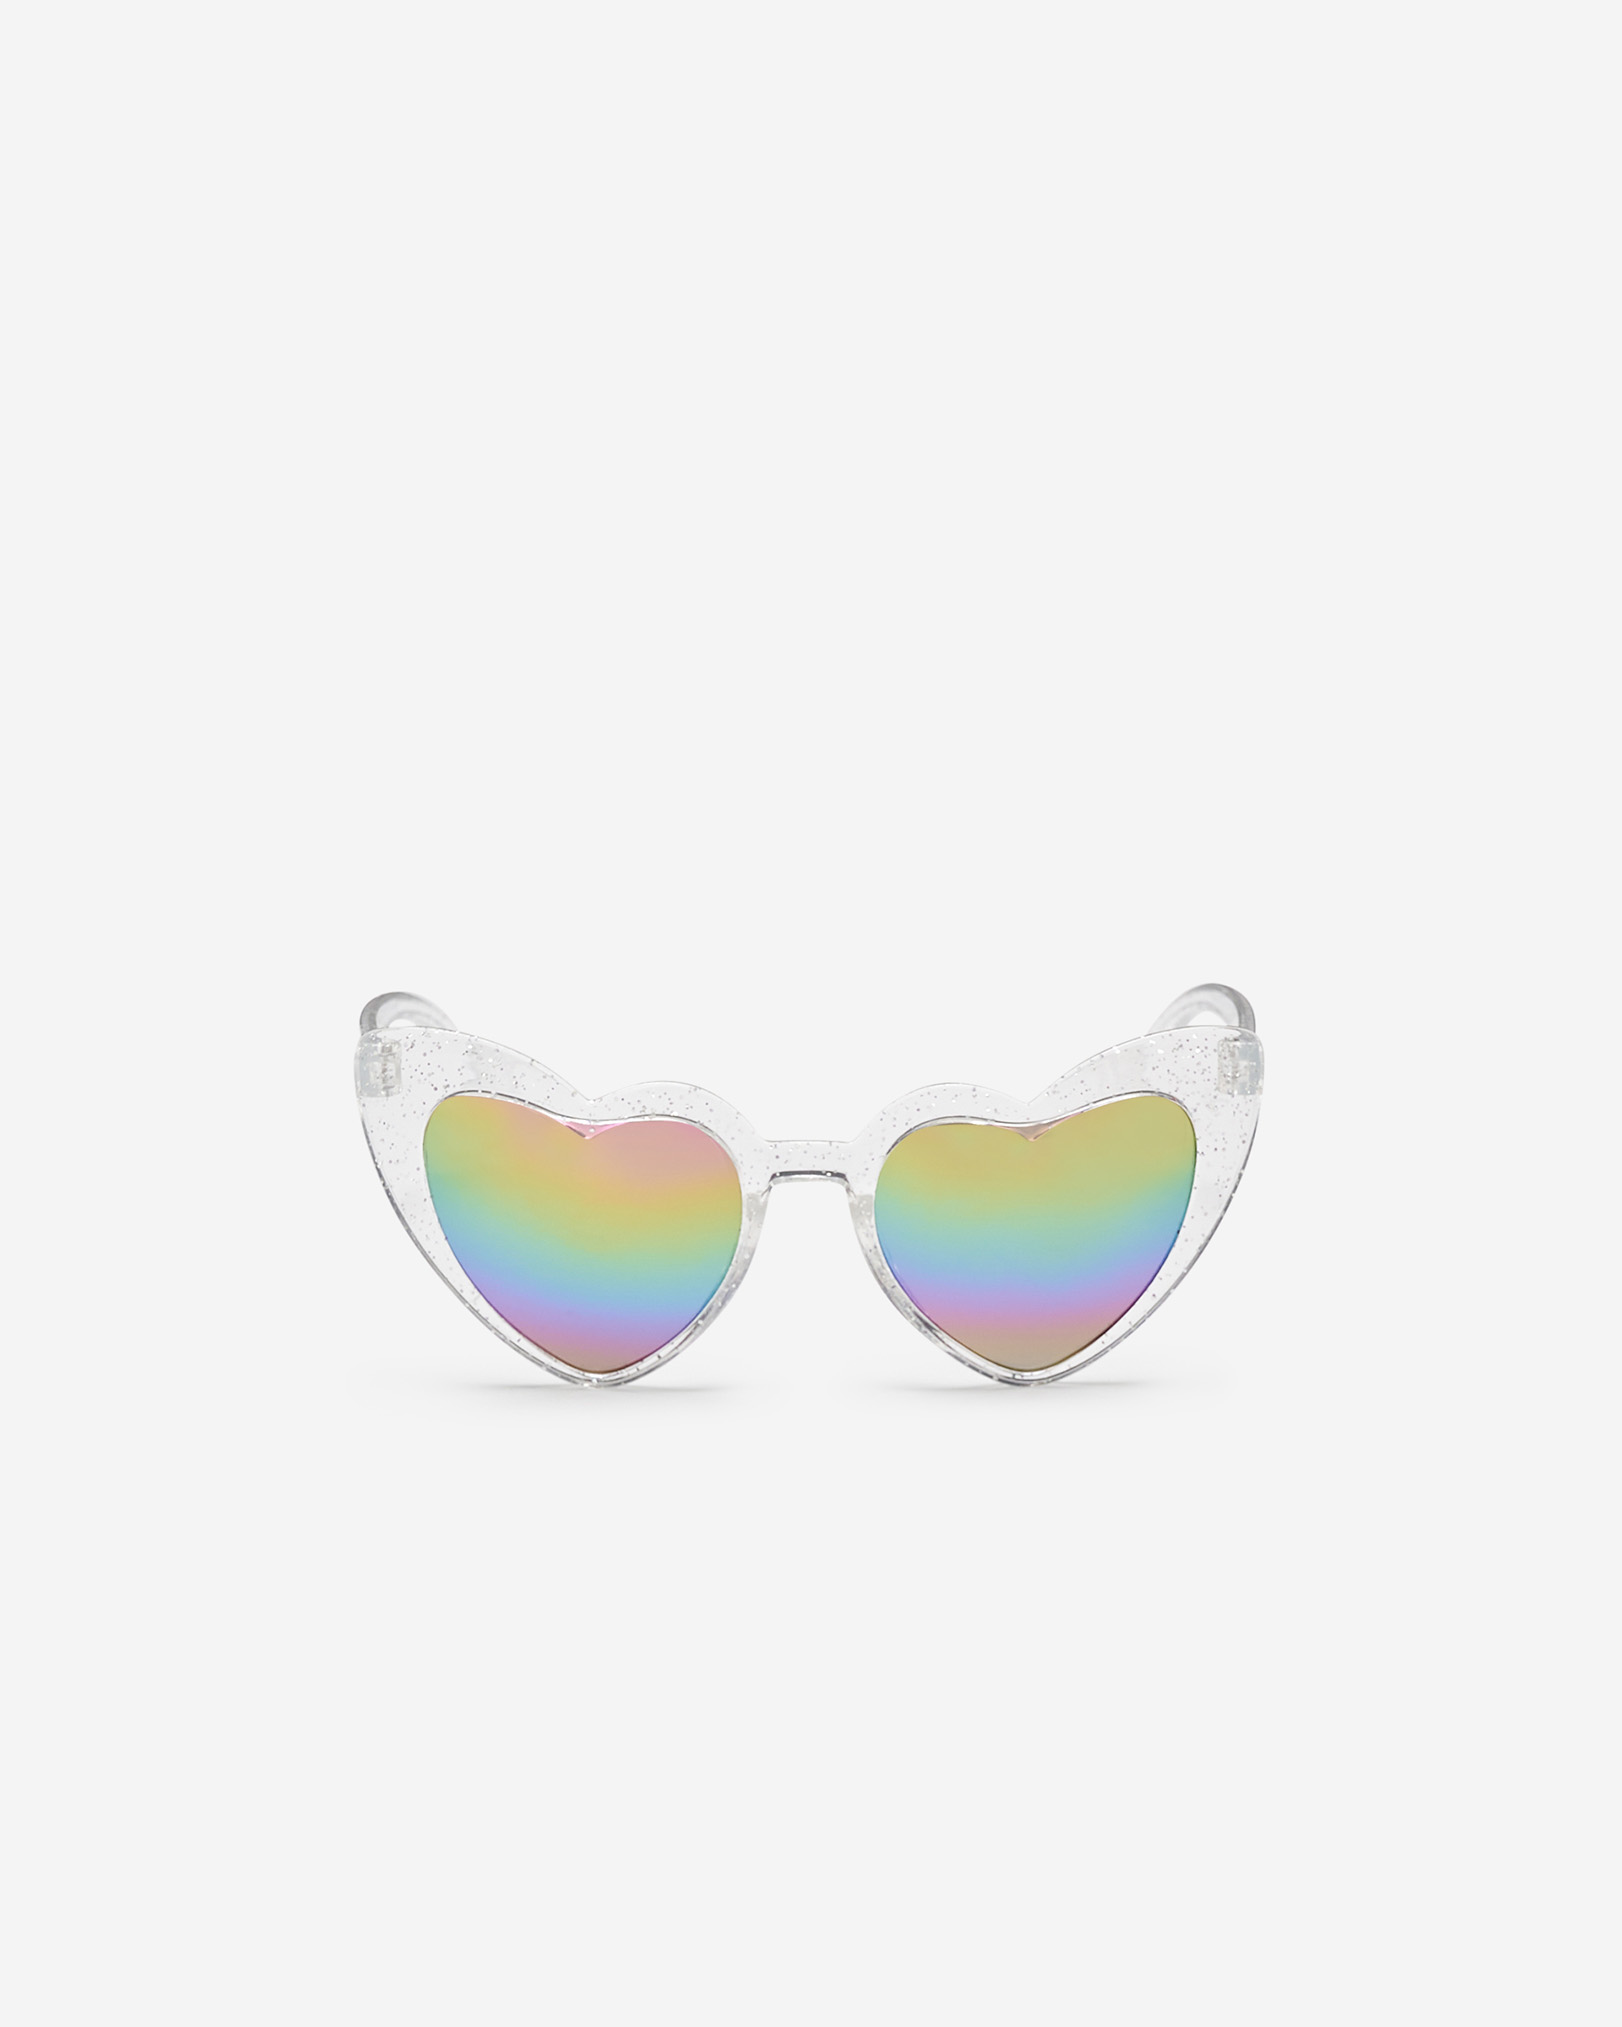 Roots Kids Heart Sunglasses in Infinity Speckle